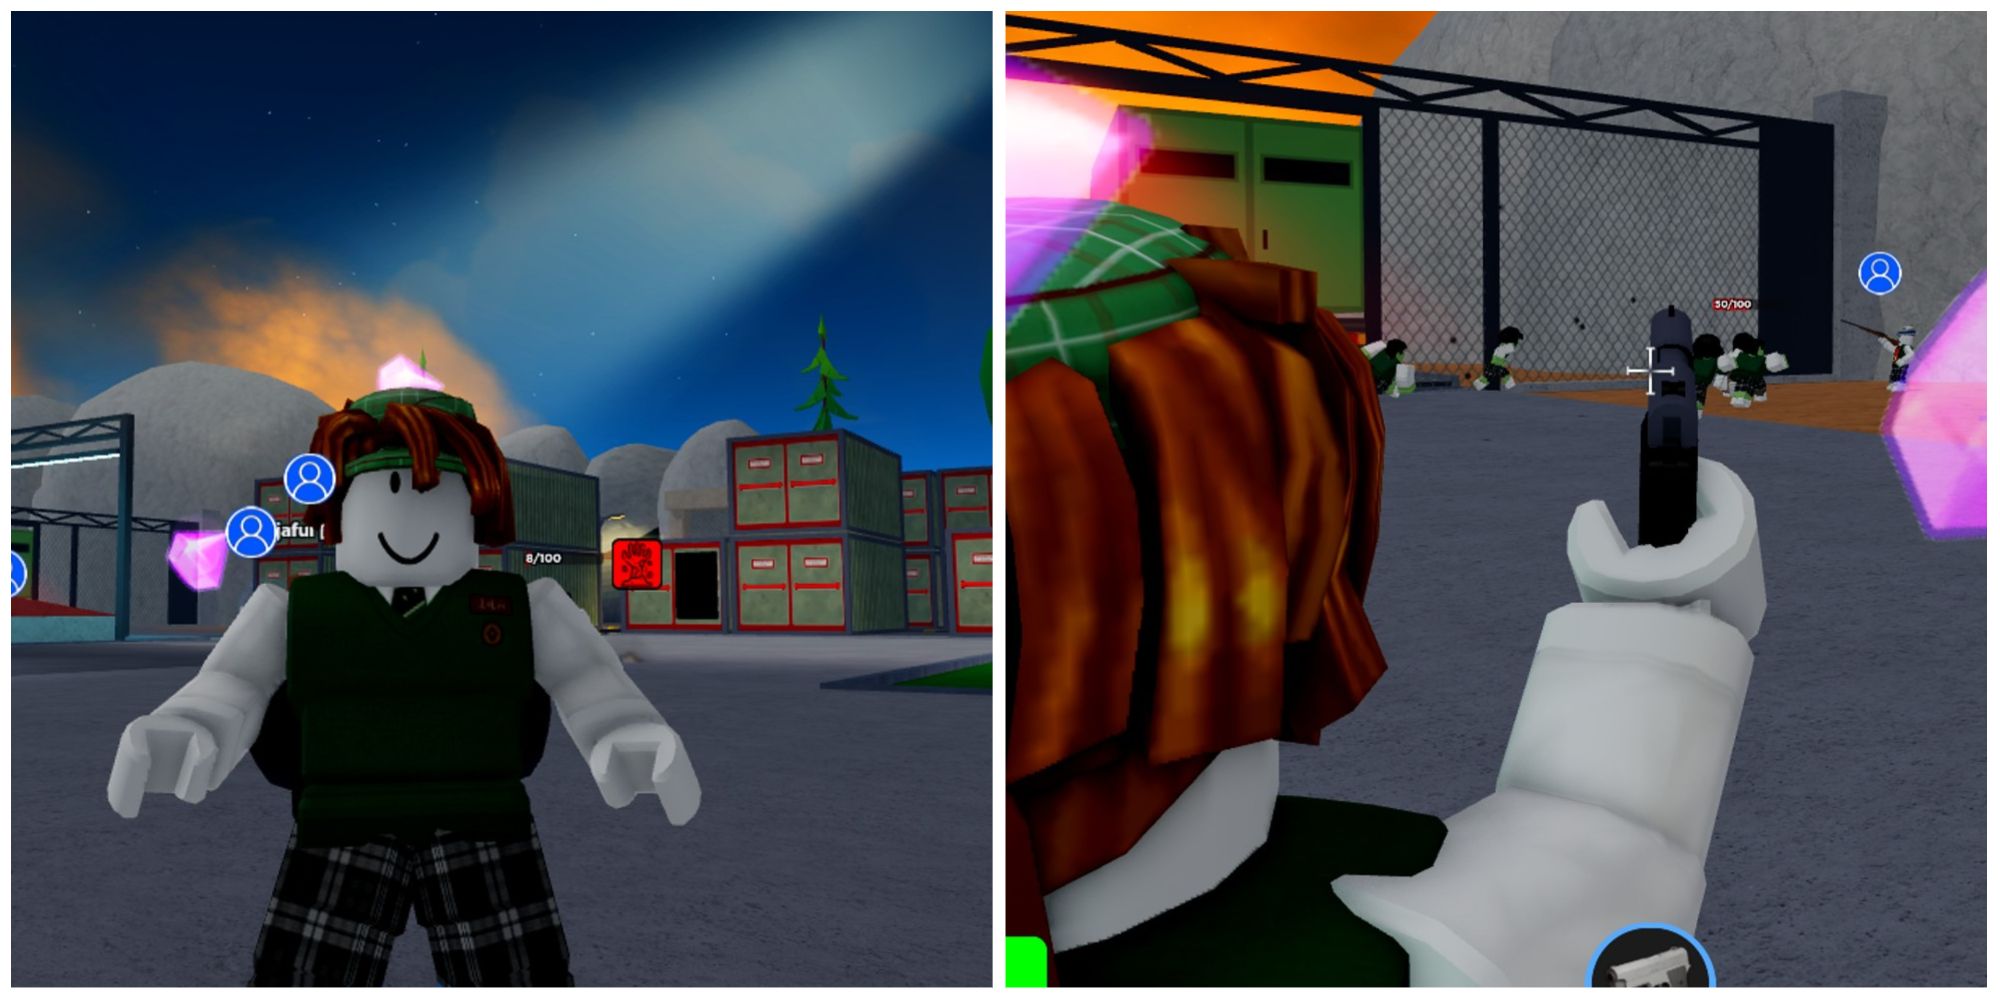 Roblox Brookhaven RP Zombie Invasion codes (November 2022): Free Points